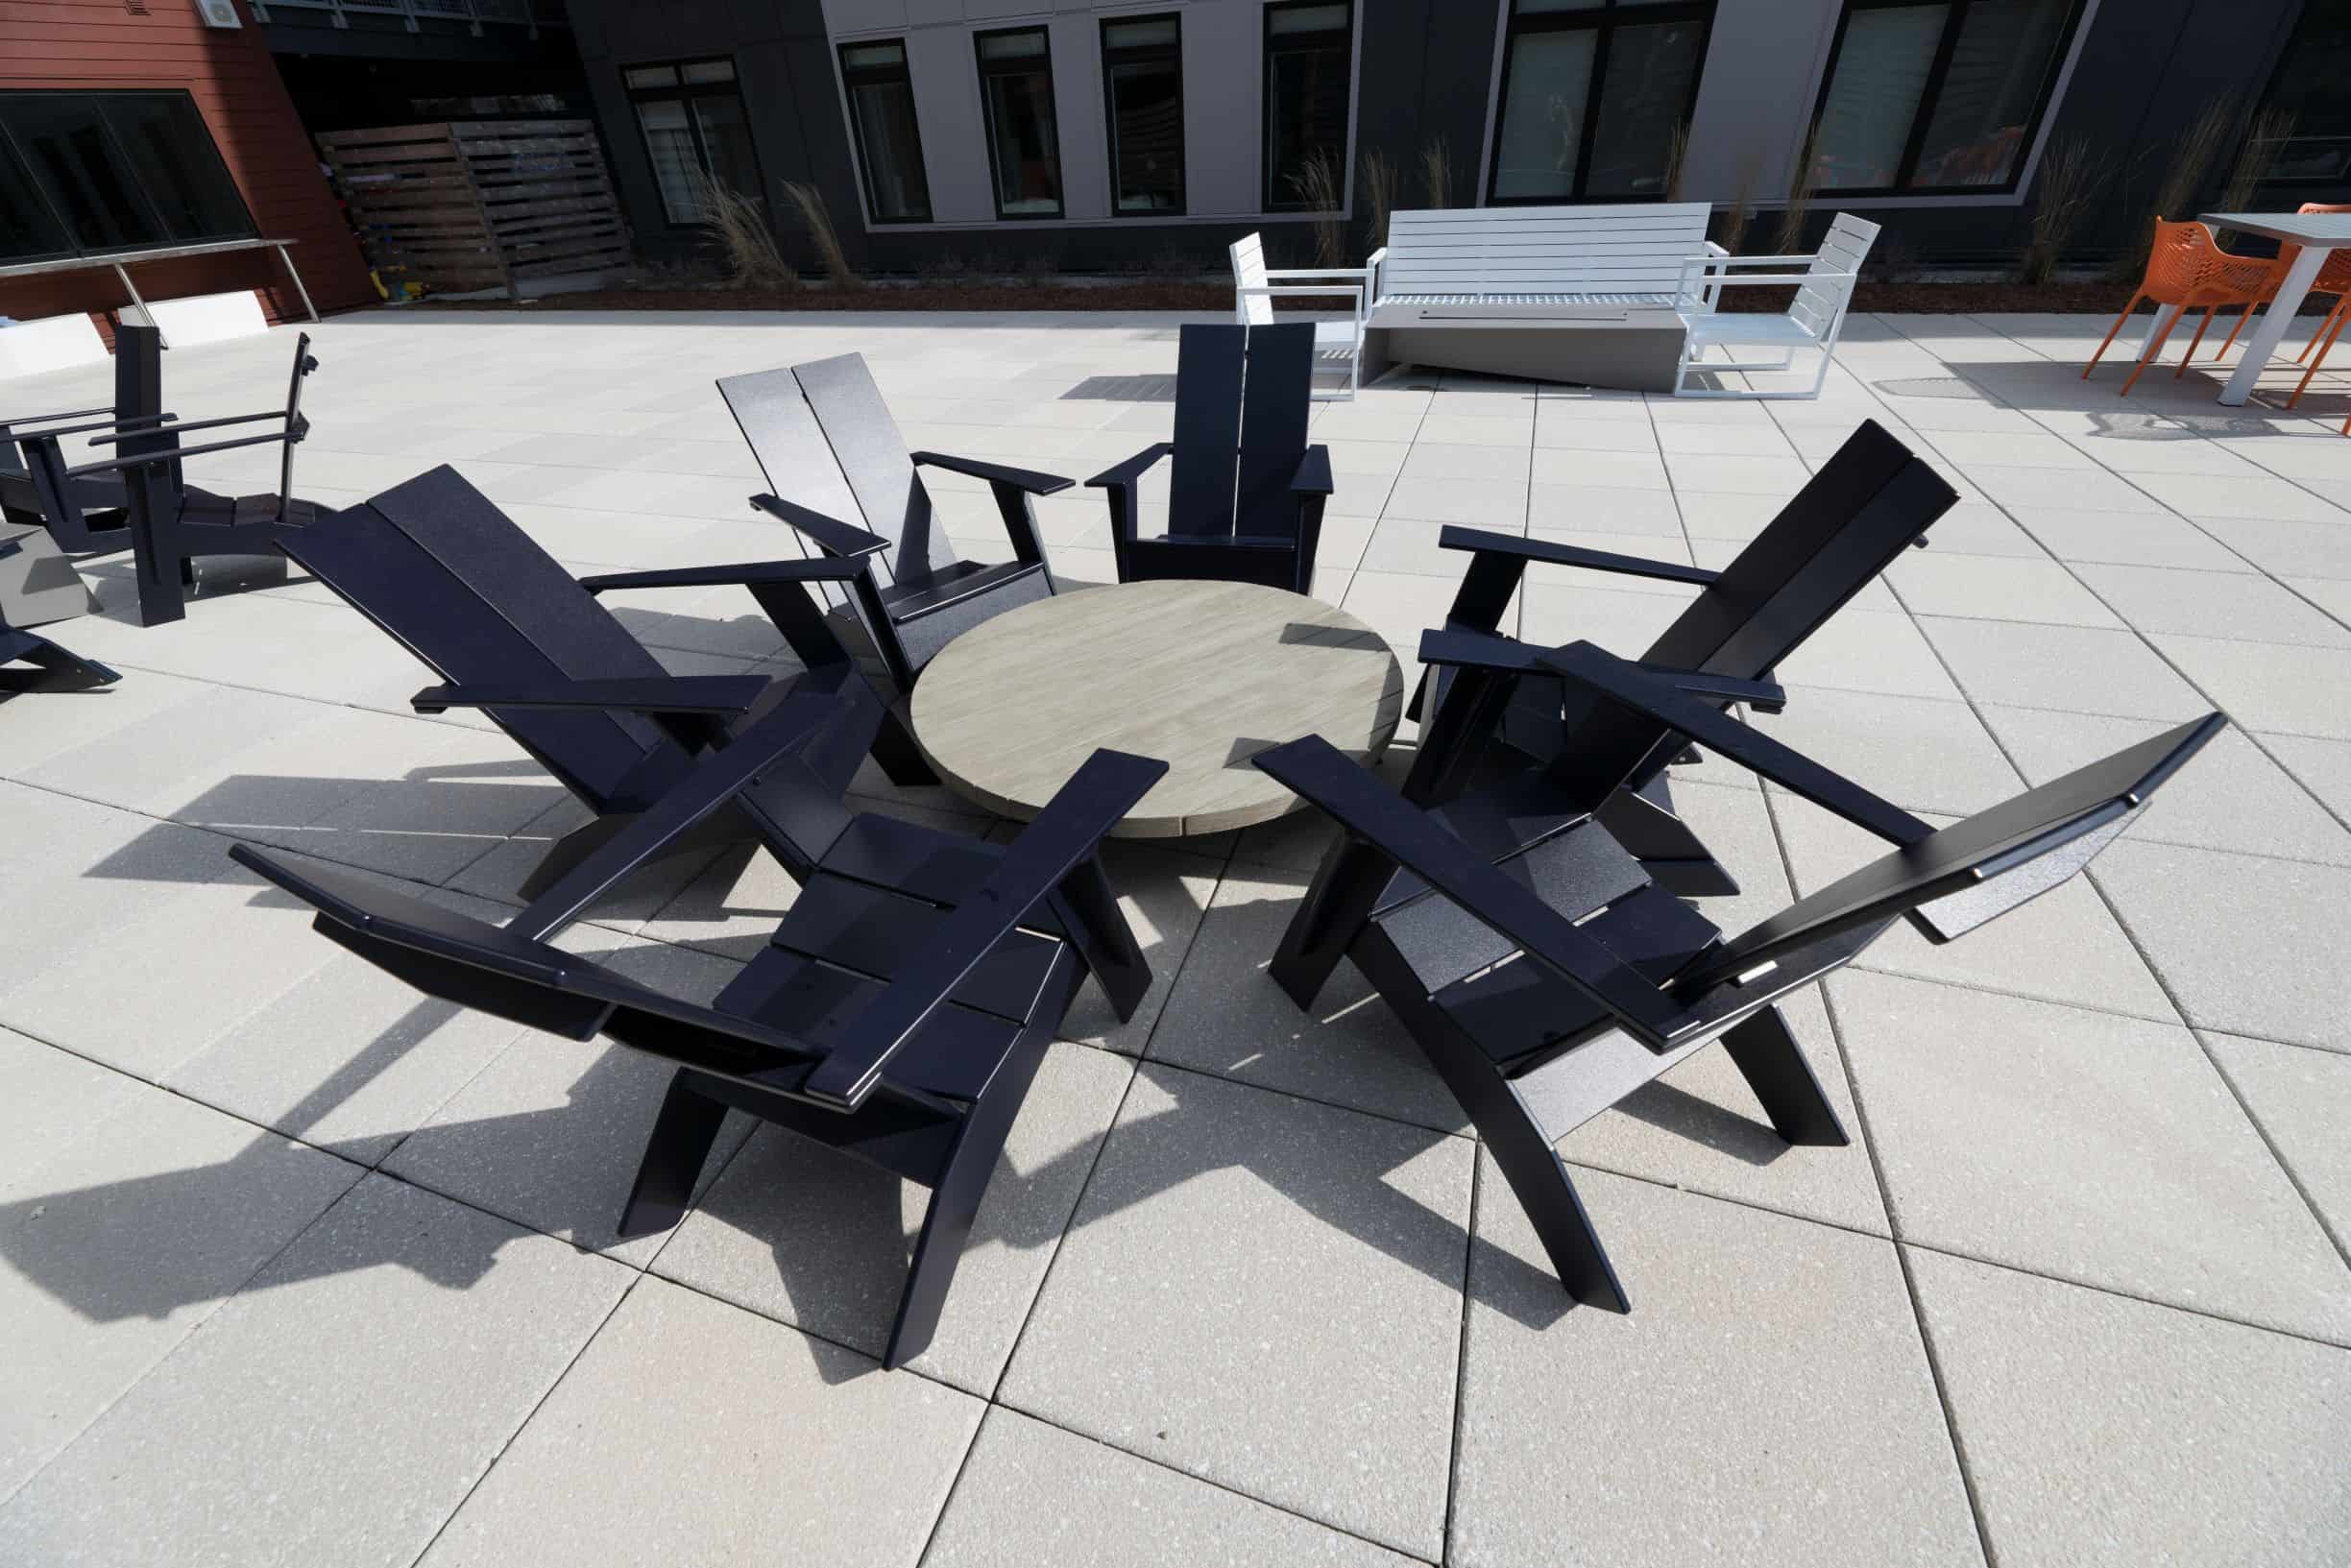 Outdoor Furnishings - Benches, Tables, & Chairs (2)